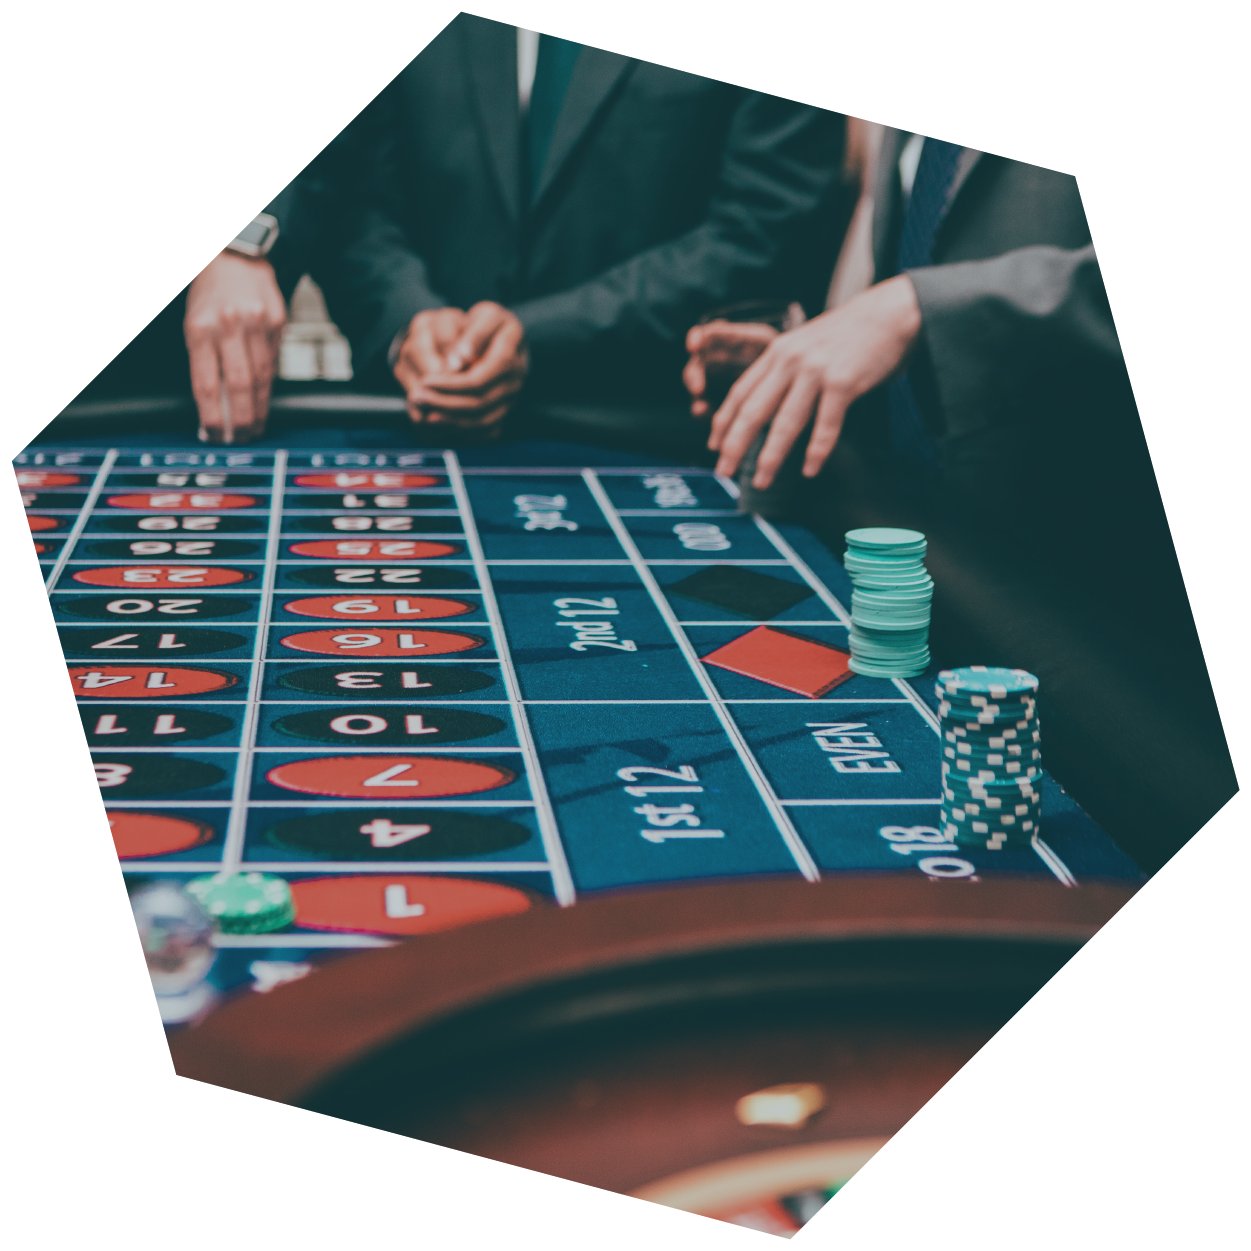 Live roulette online software puts users first